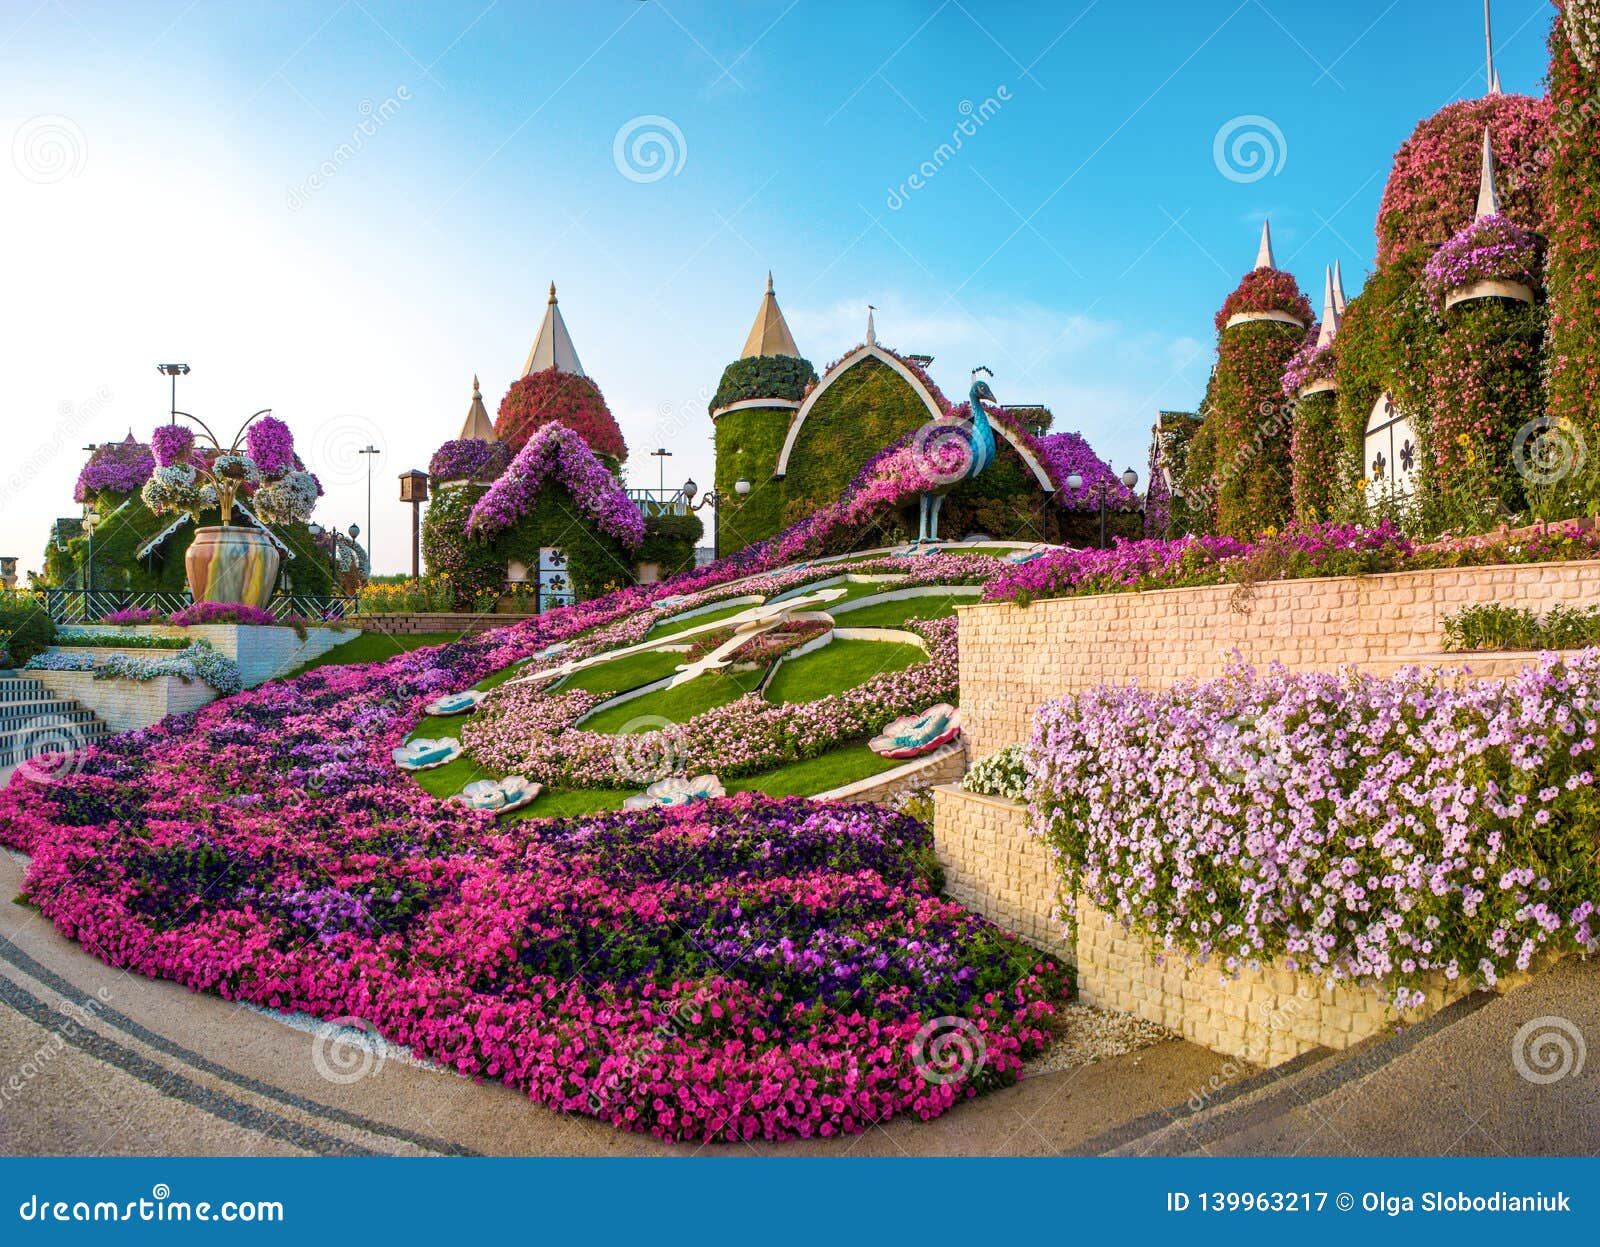 dubai, miracle garden - the village of flowers editorial photography